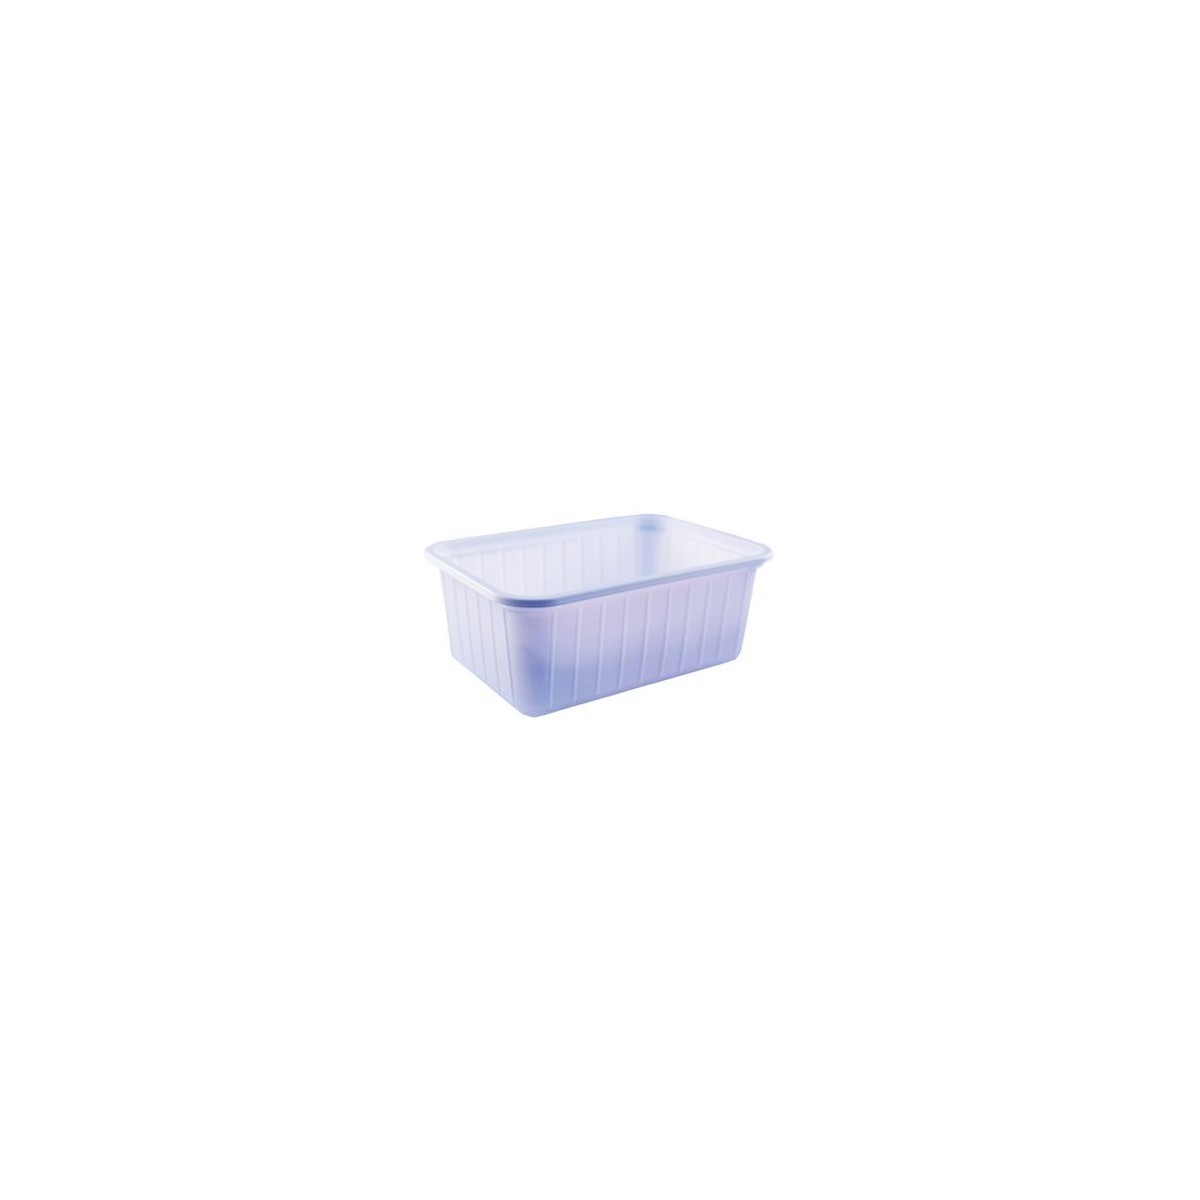 PLASTIC ICE CREAM BOX 1/2 L WITH LID 500 PIECES FOST+2020 INCLUDED 6,47192 €  BOX